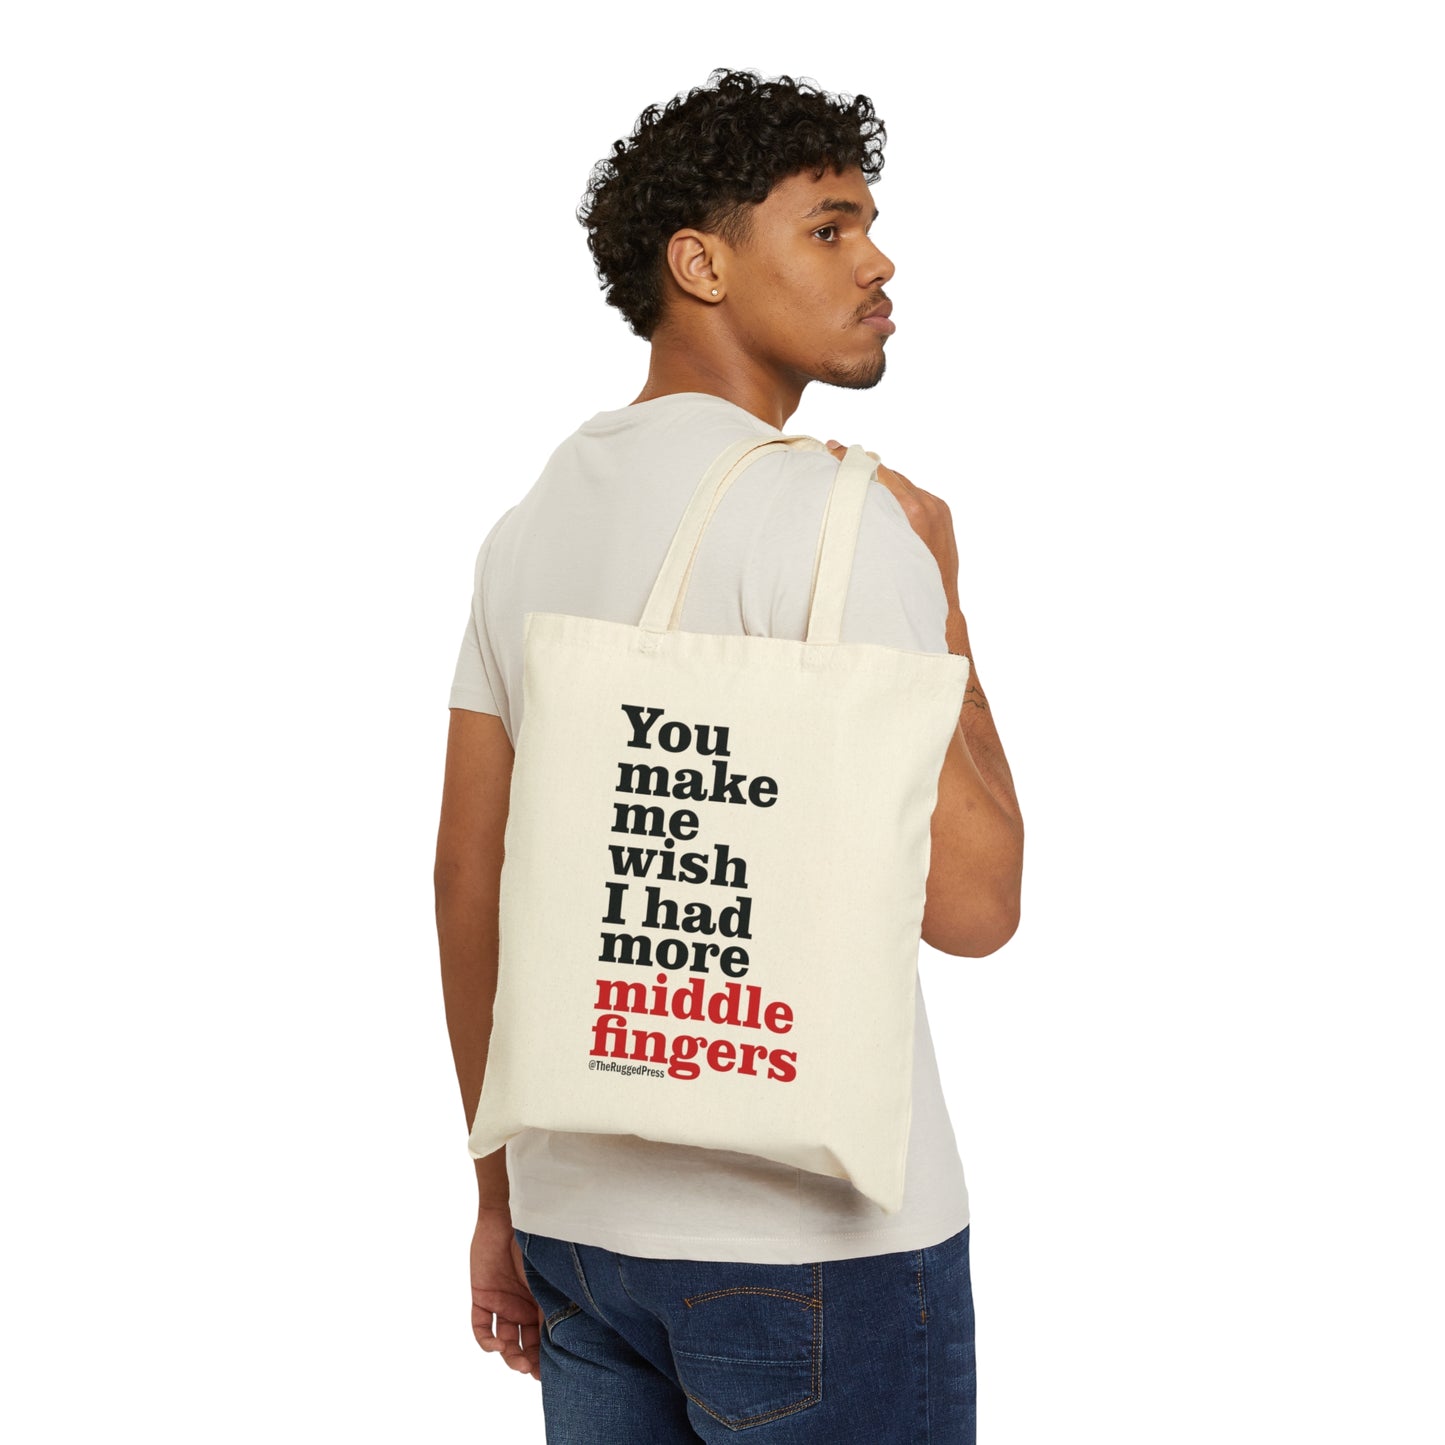 You make me wish I had more middle fingers  – Canvas Tote Bag